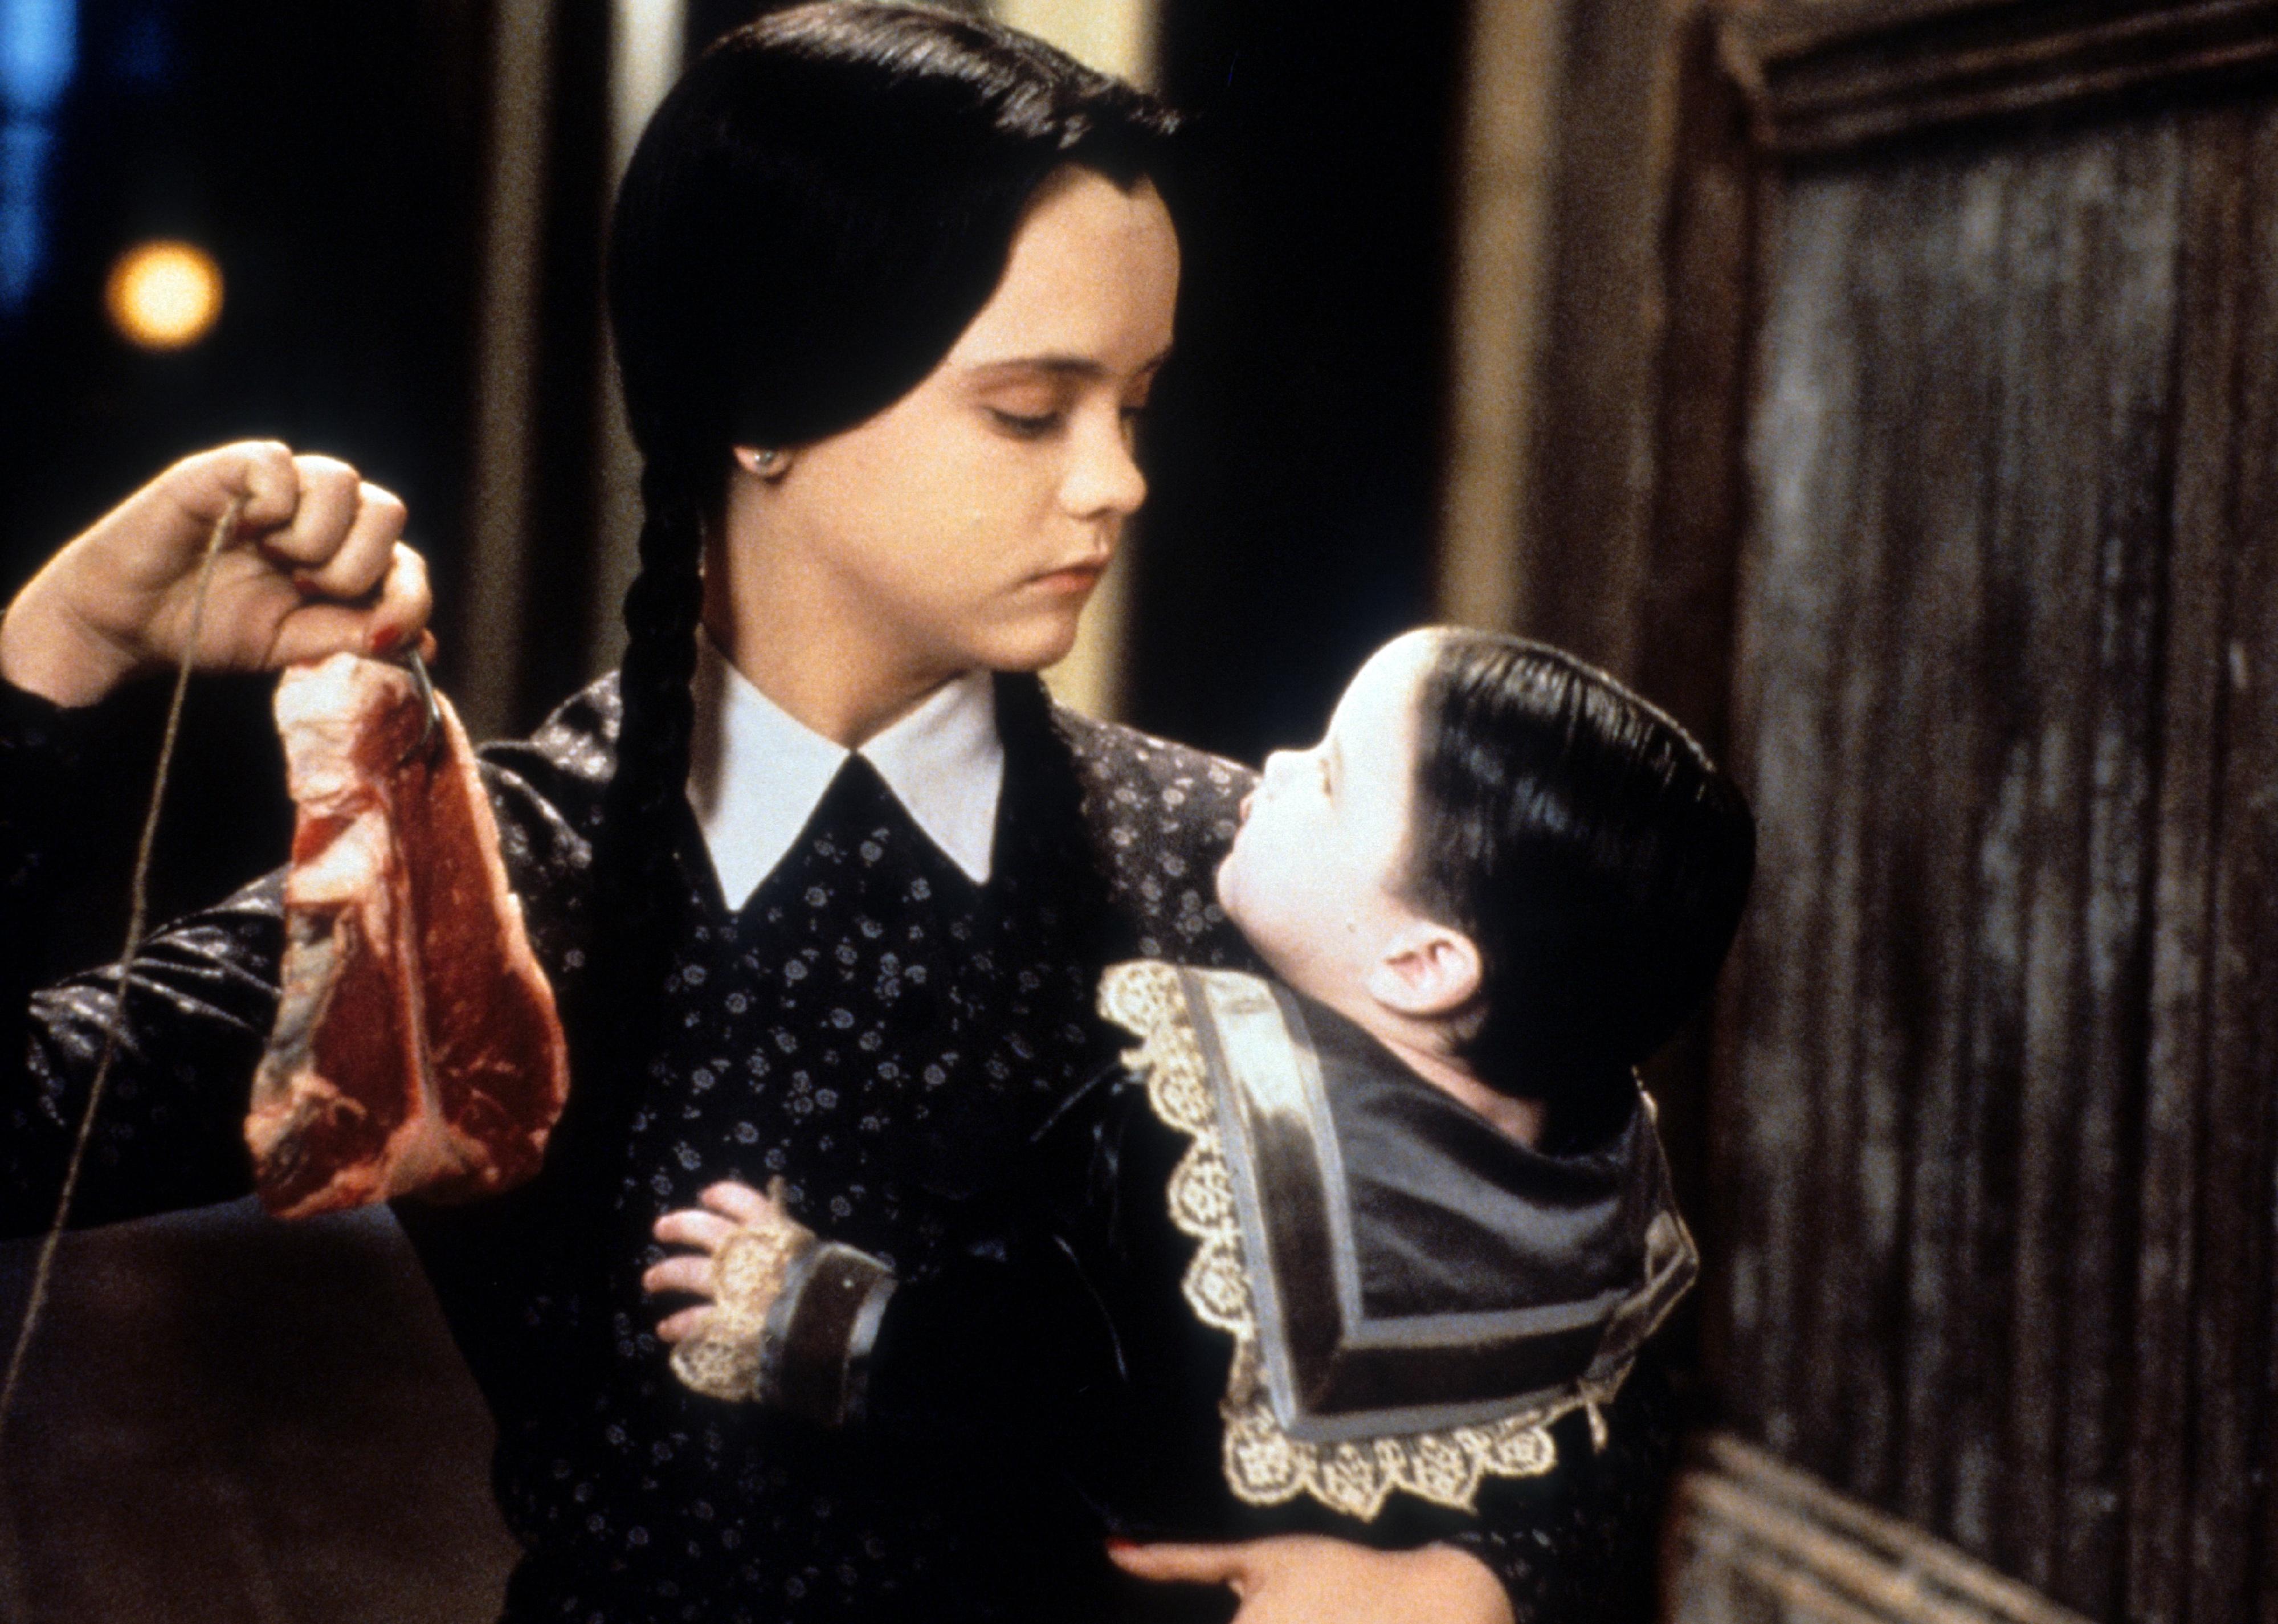 Christina Ricci dangling meat in a scene from 'Addams Family Values'.